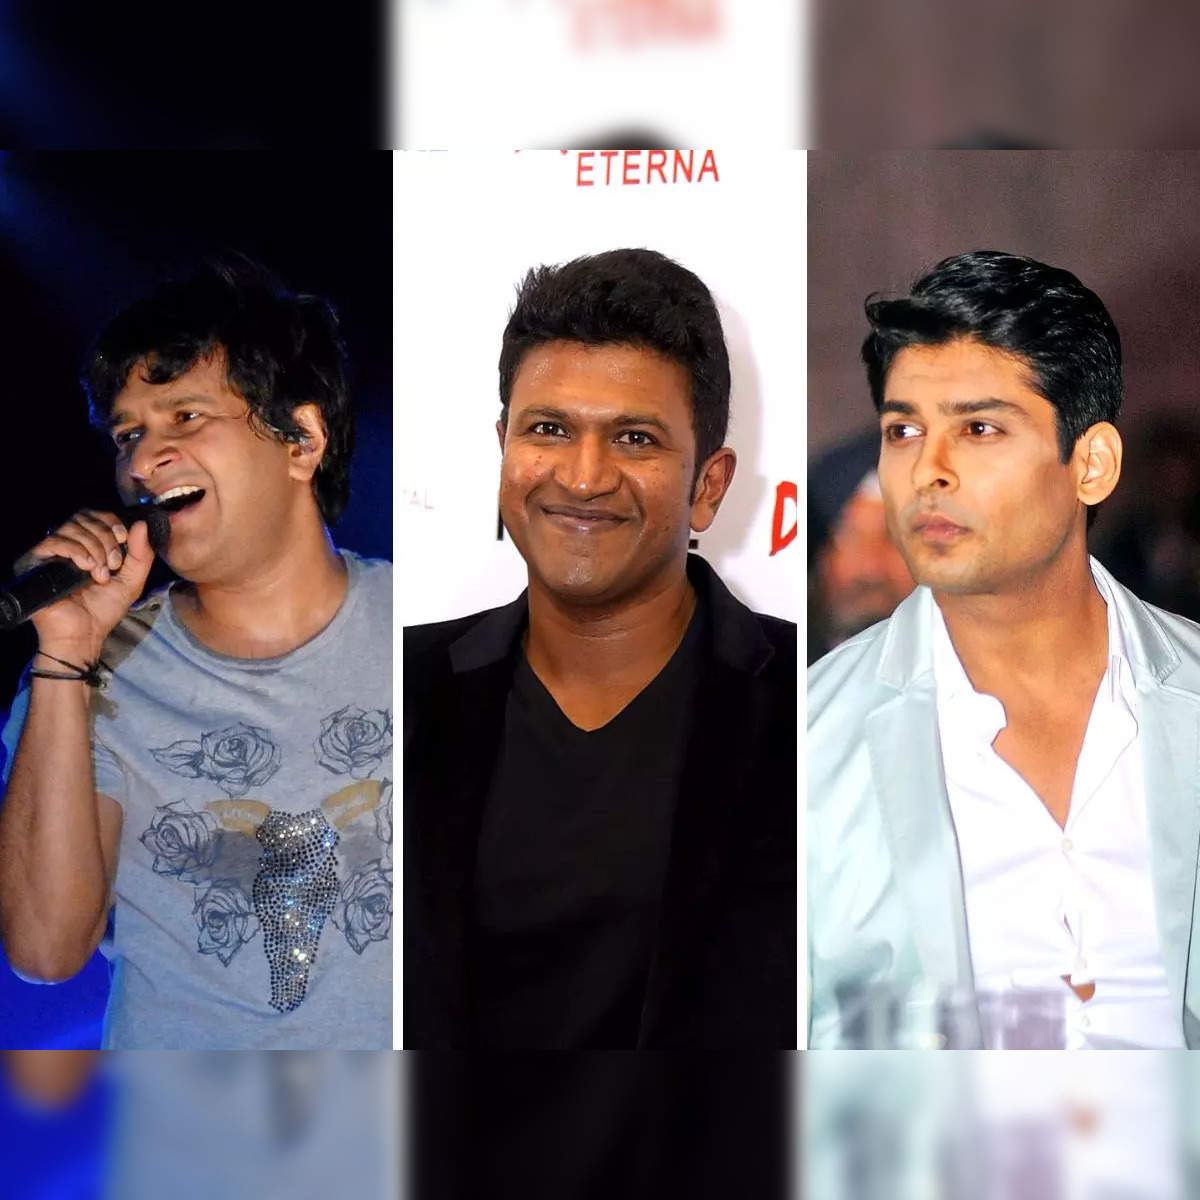 Three Stars are left same type of death But There forever in hour Heart ❤❤ 

Your memory's are always precious to me ...

#DrPuneethRajkumar 
#krishnakumarkunnath
#SiddharthShukla  #indianews
#sandalwood #Bollywood